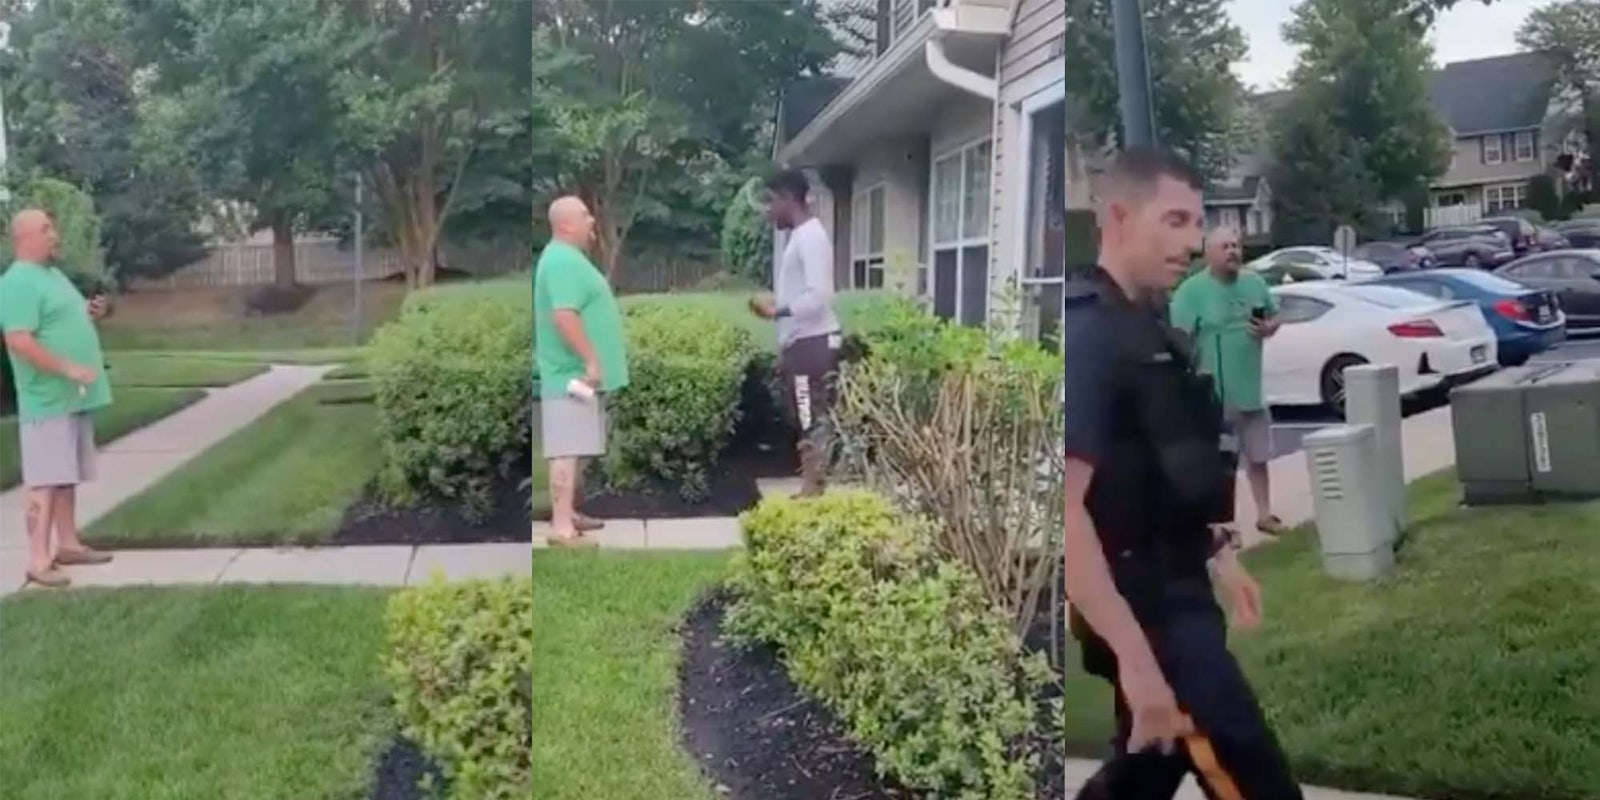 In a video, a white man is seen yelling racist slurs at his neighbors, who are Black,